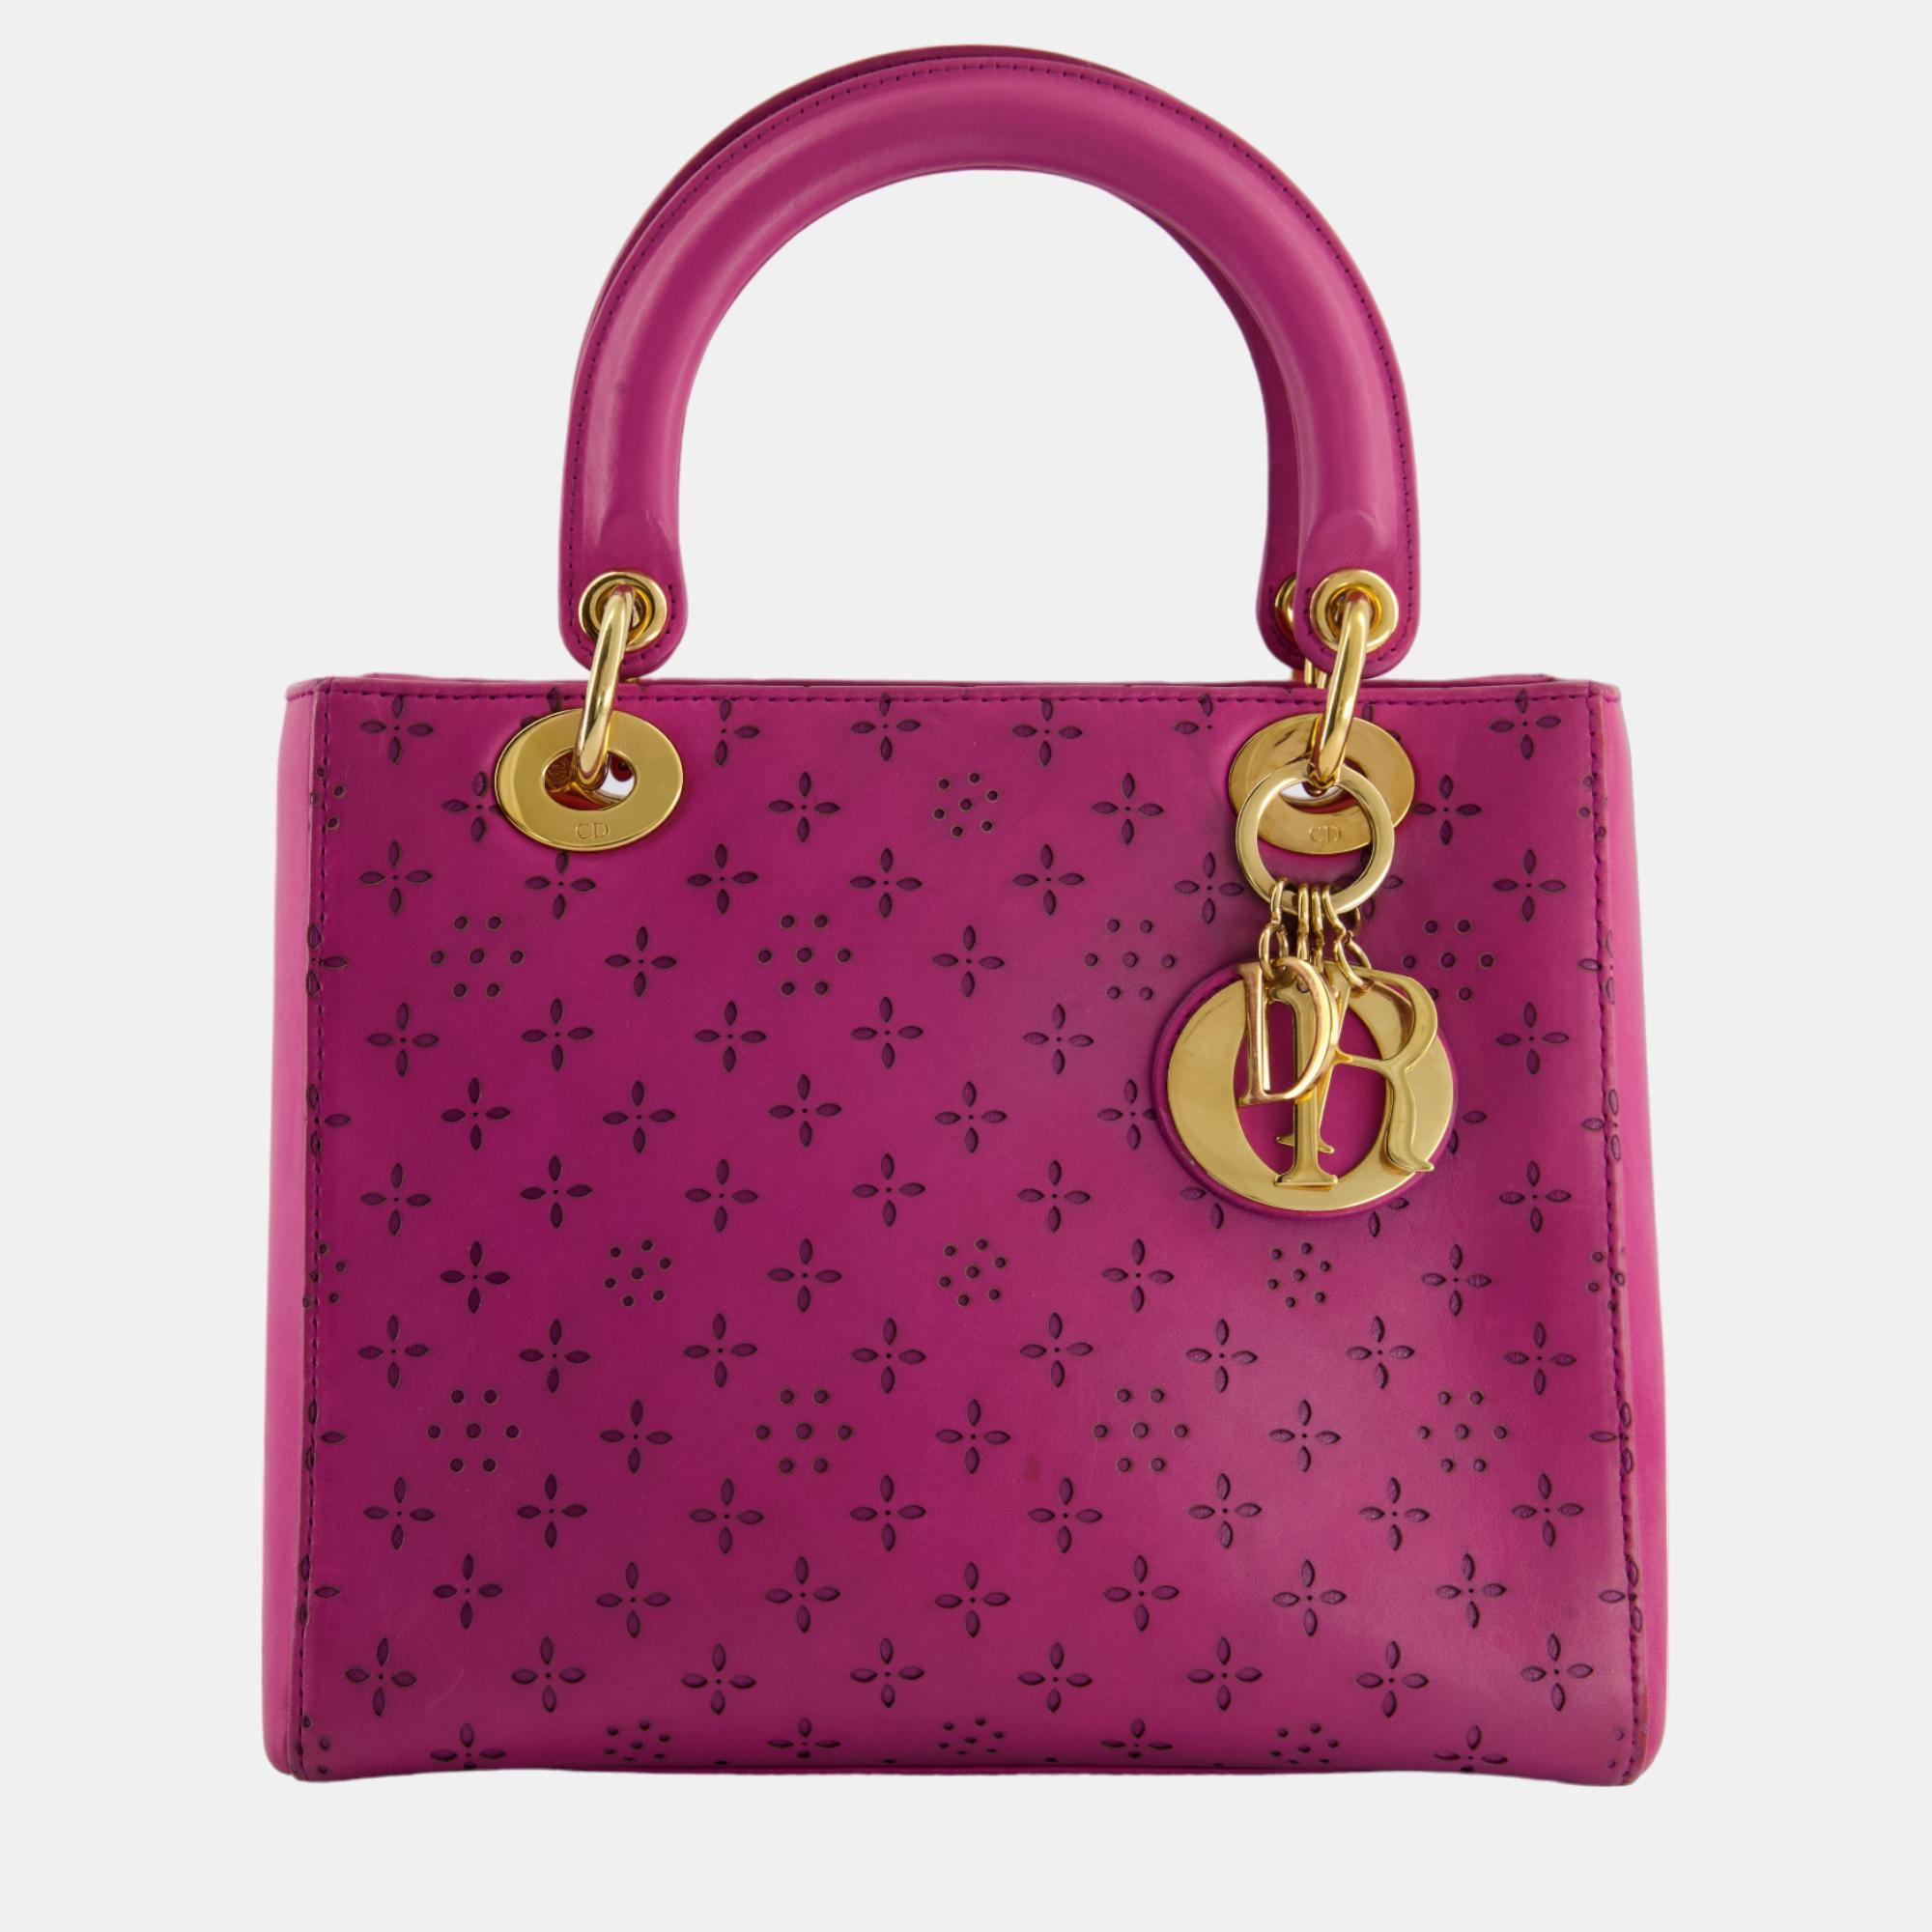 Christian Dior Vintage Medium Lady Dior Bag in Fuchsia Leather with Gold Hardware